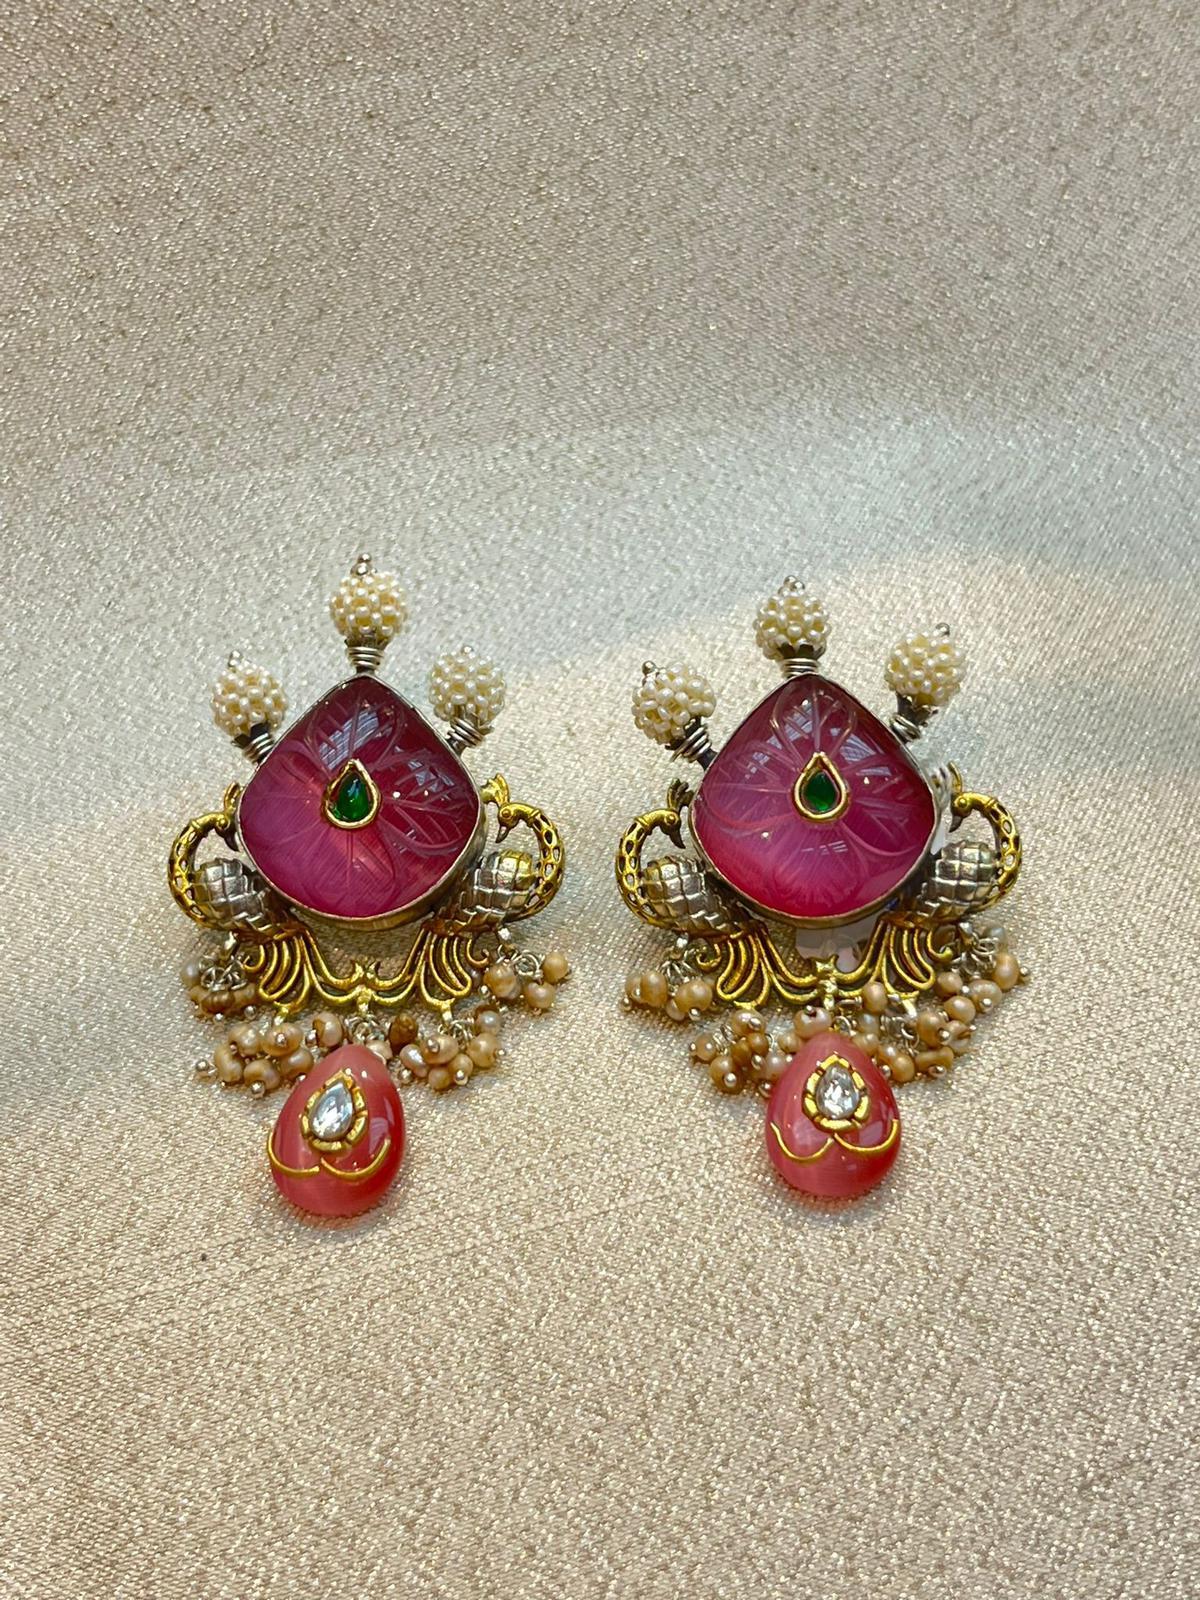 Bochic Vintage  “IndoChina” Oriental Vintage Silver & Tourmaline Earrings with natural oriental pearls 
The earrings from the 